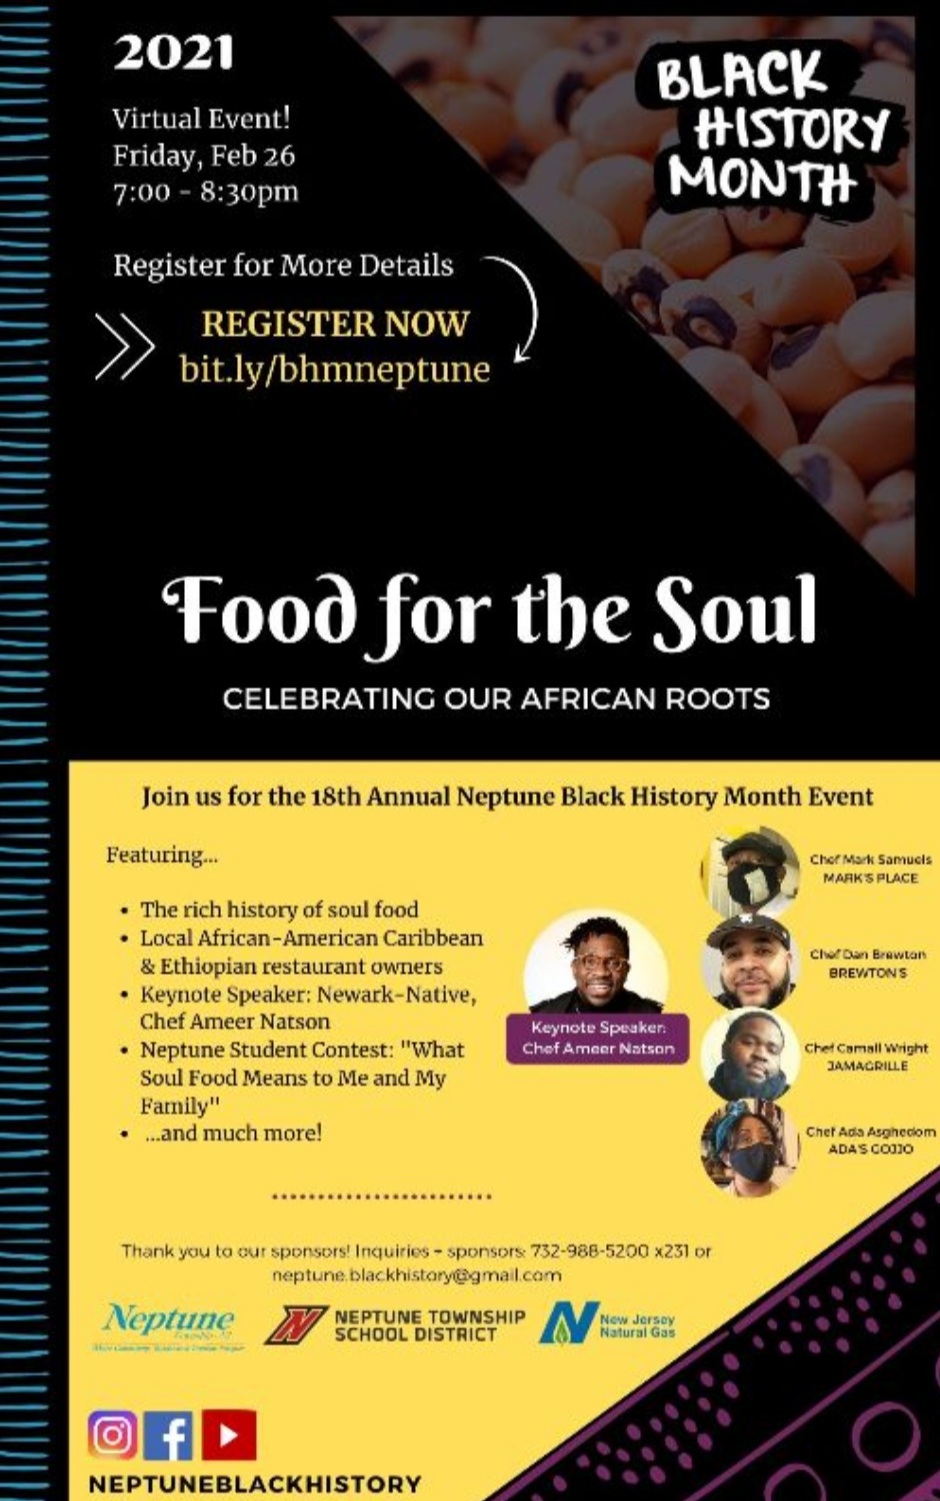 Neptune Township Black History Month Event: "Food For The Soul"